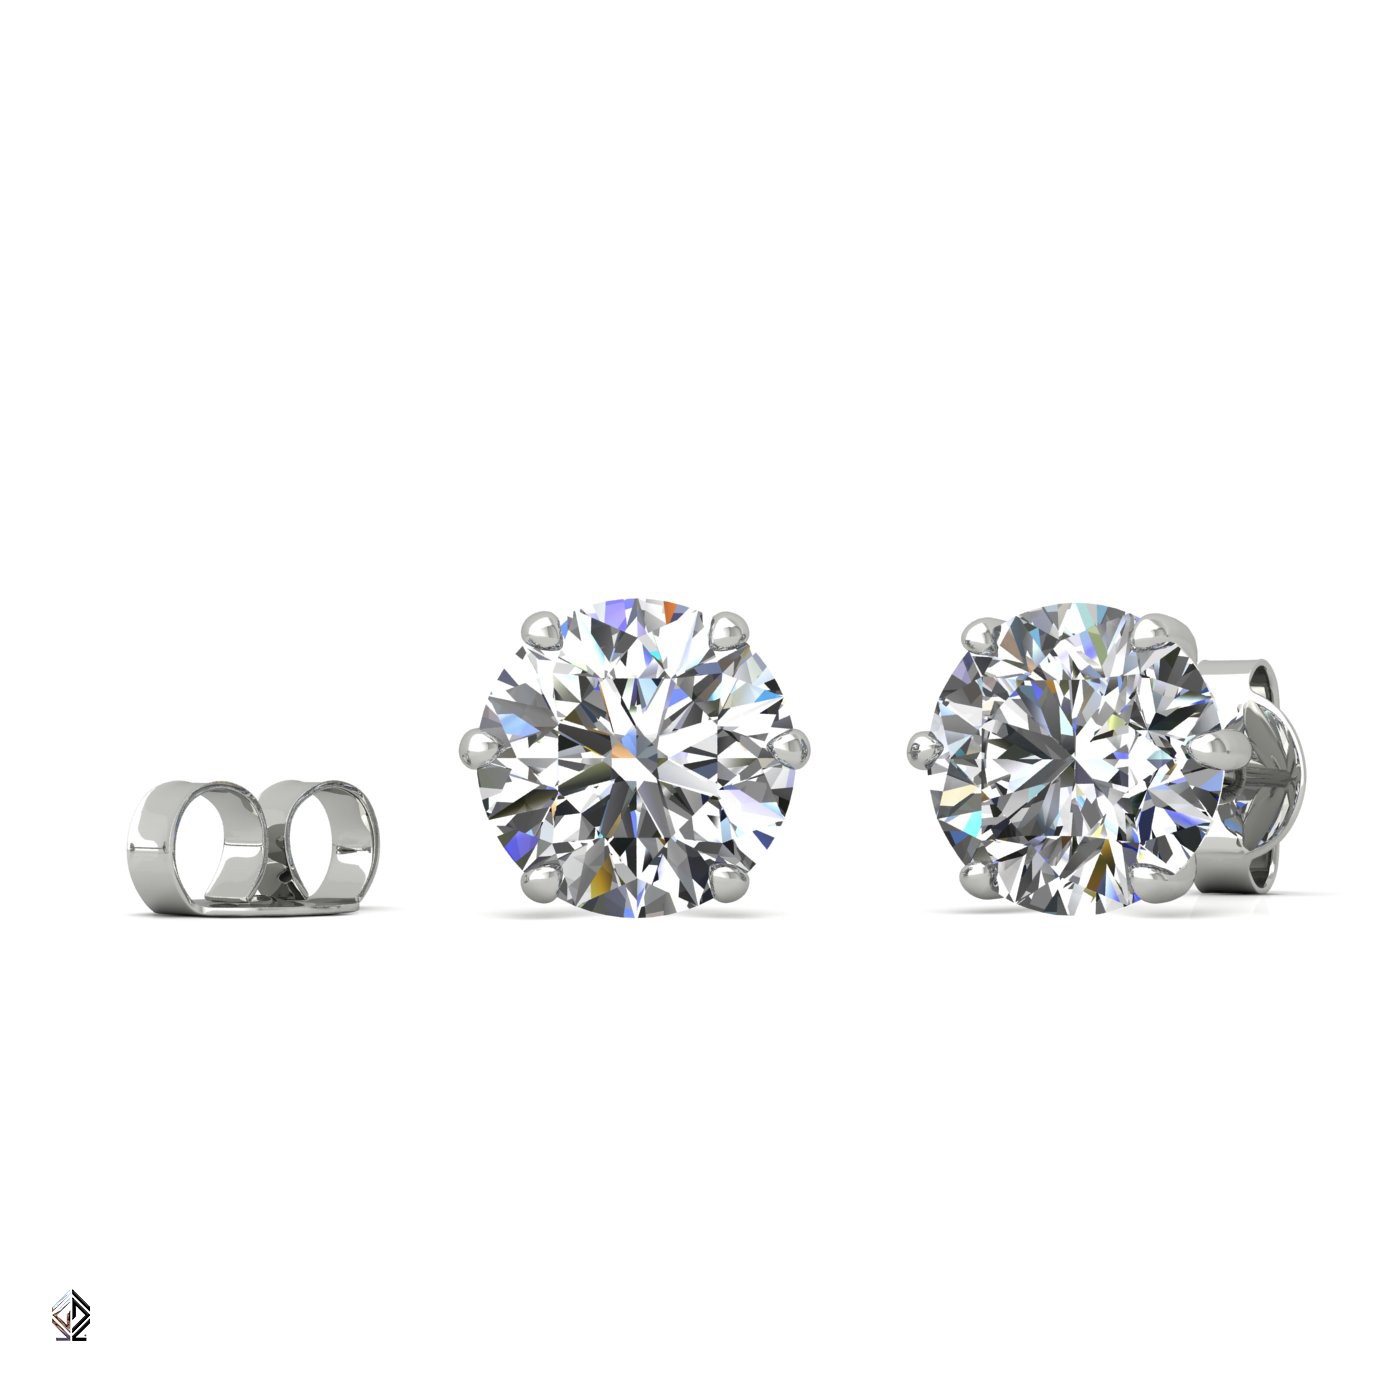 18k white gold 0,7 ct each (1,4 tcw) 6 prongs round shape diamond earrings Photos & images